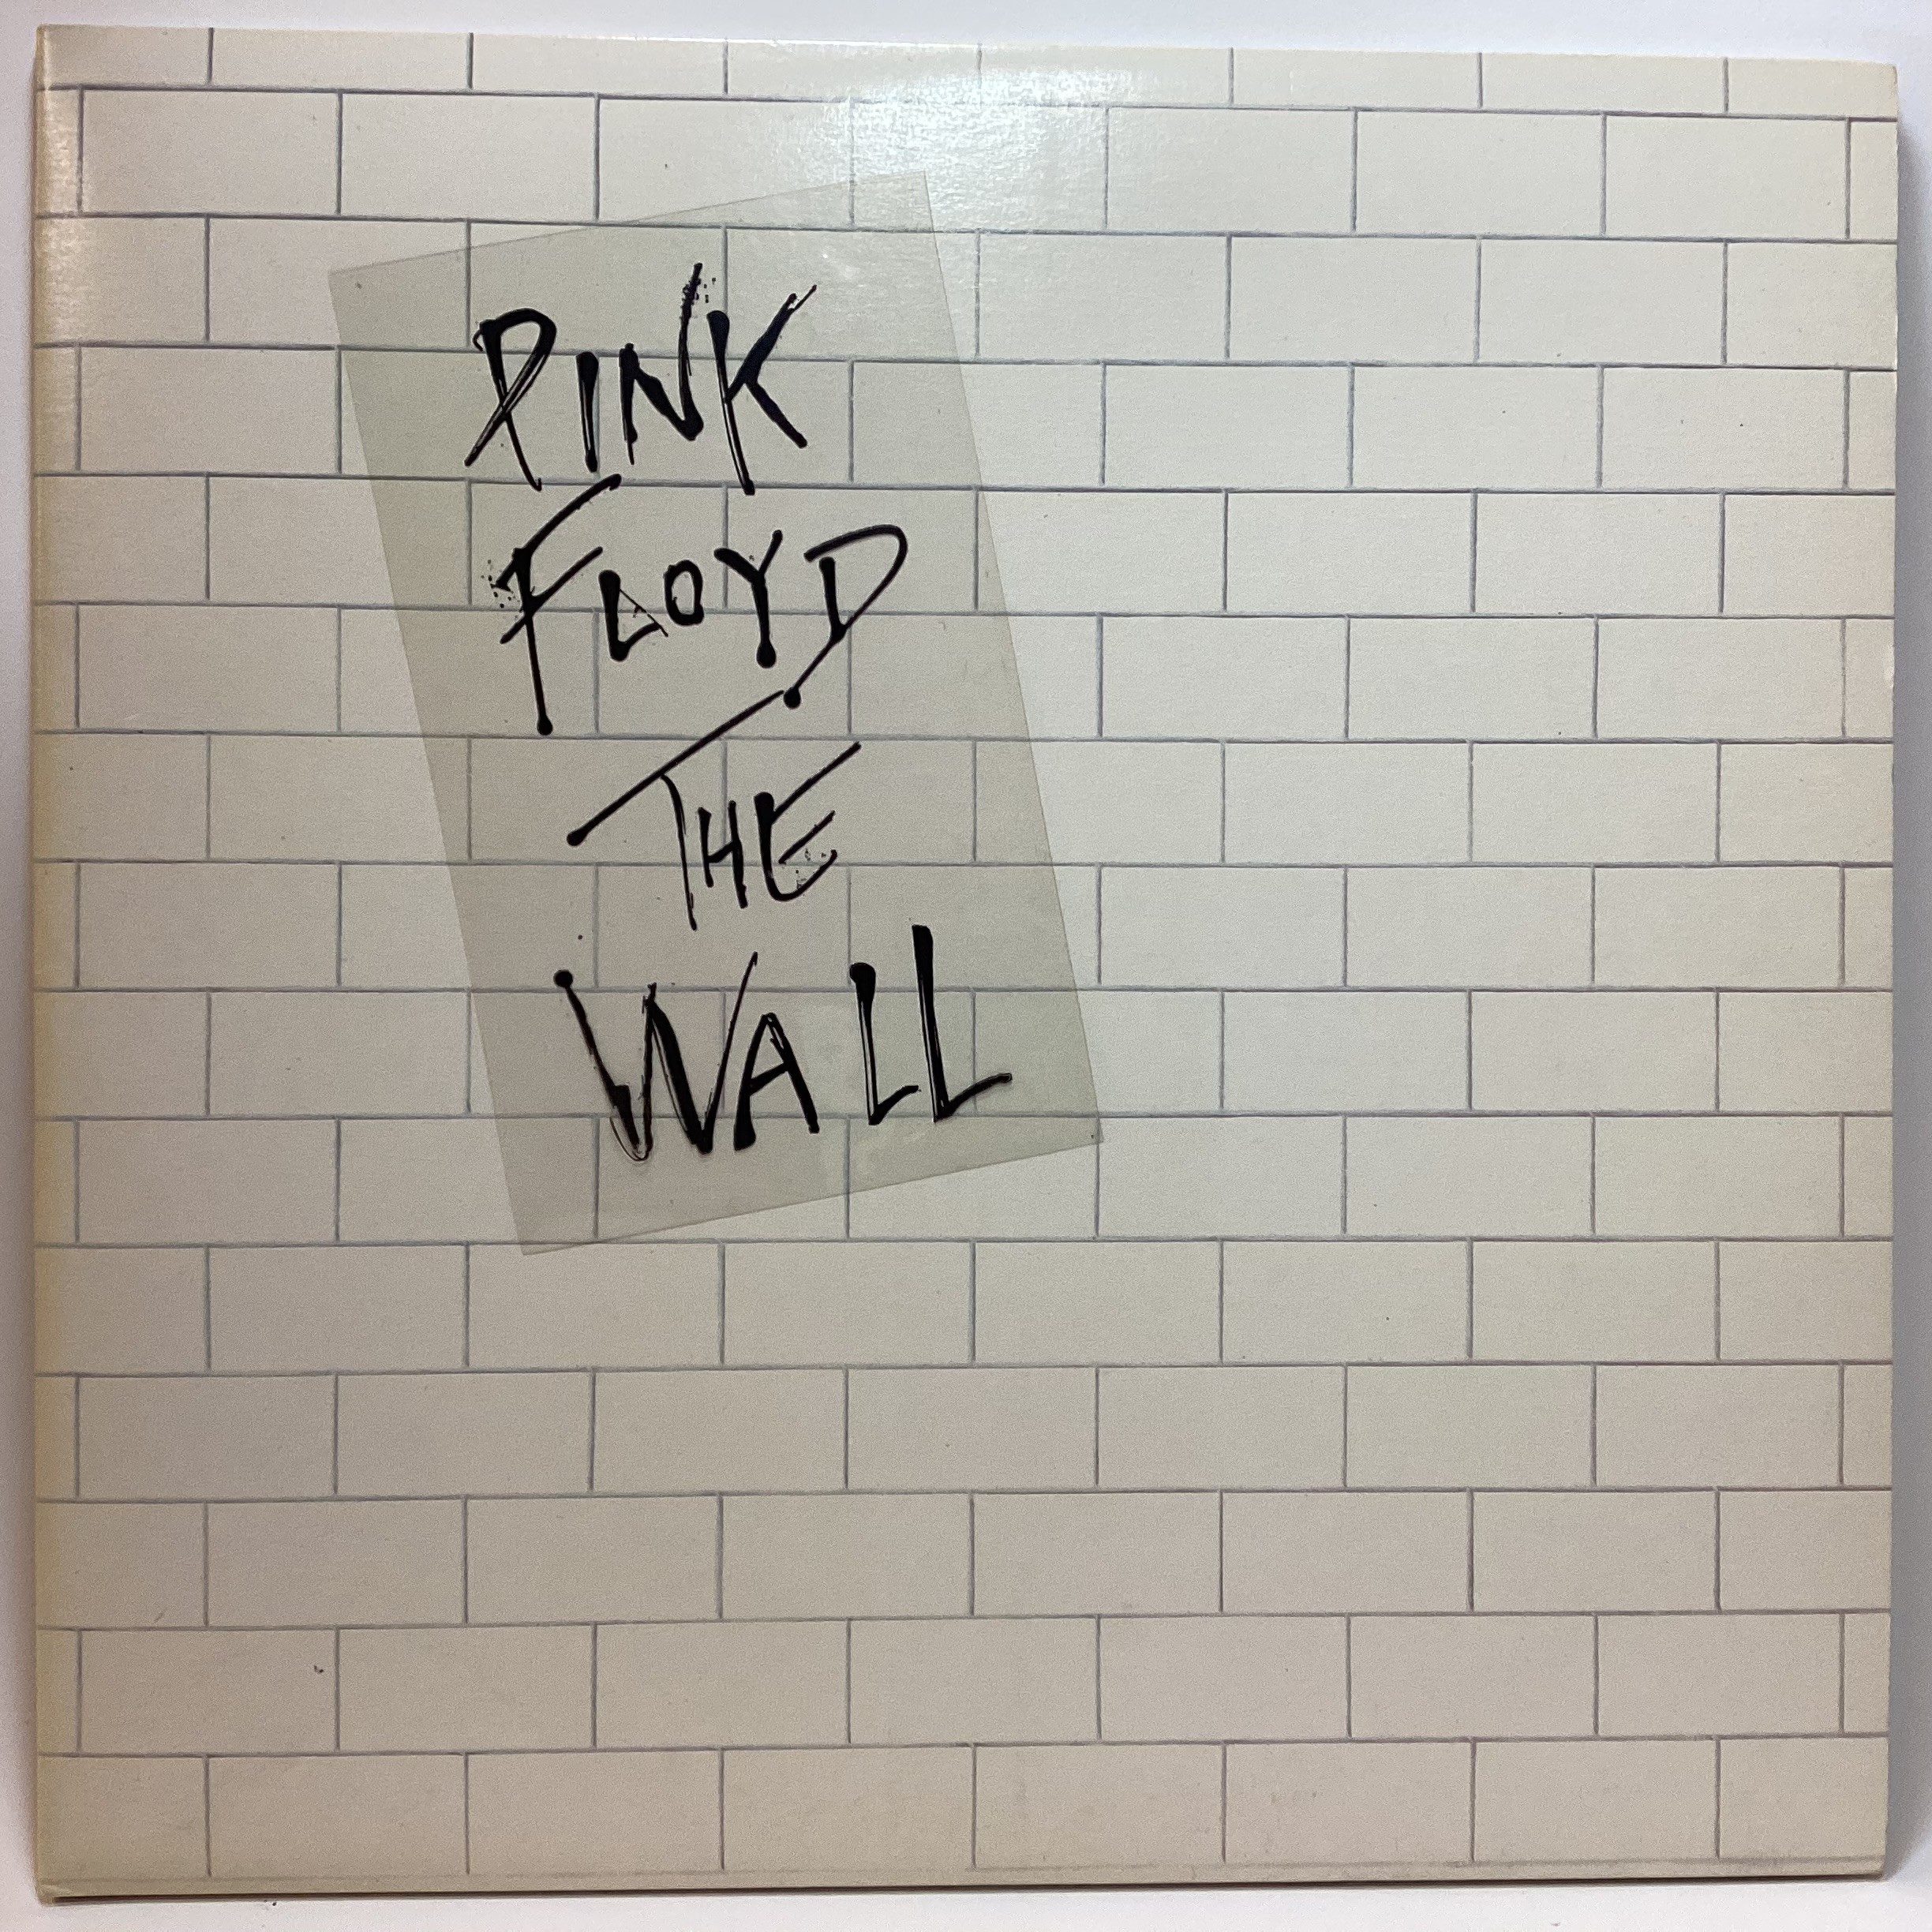 PINK FLOYD ‘THE WALL’ DOUBLE LP RECORD. Released in 1979, "The Wall" stands as one of Pink Floyd's